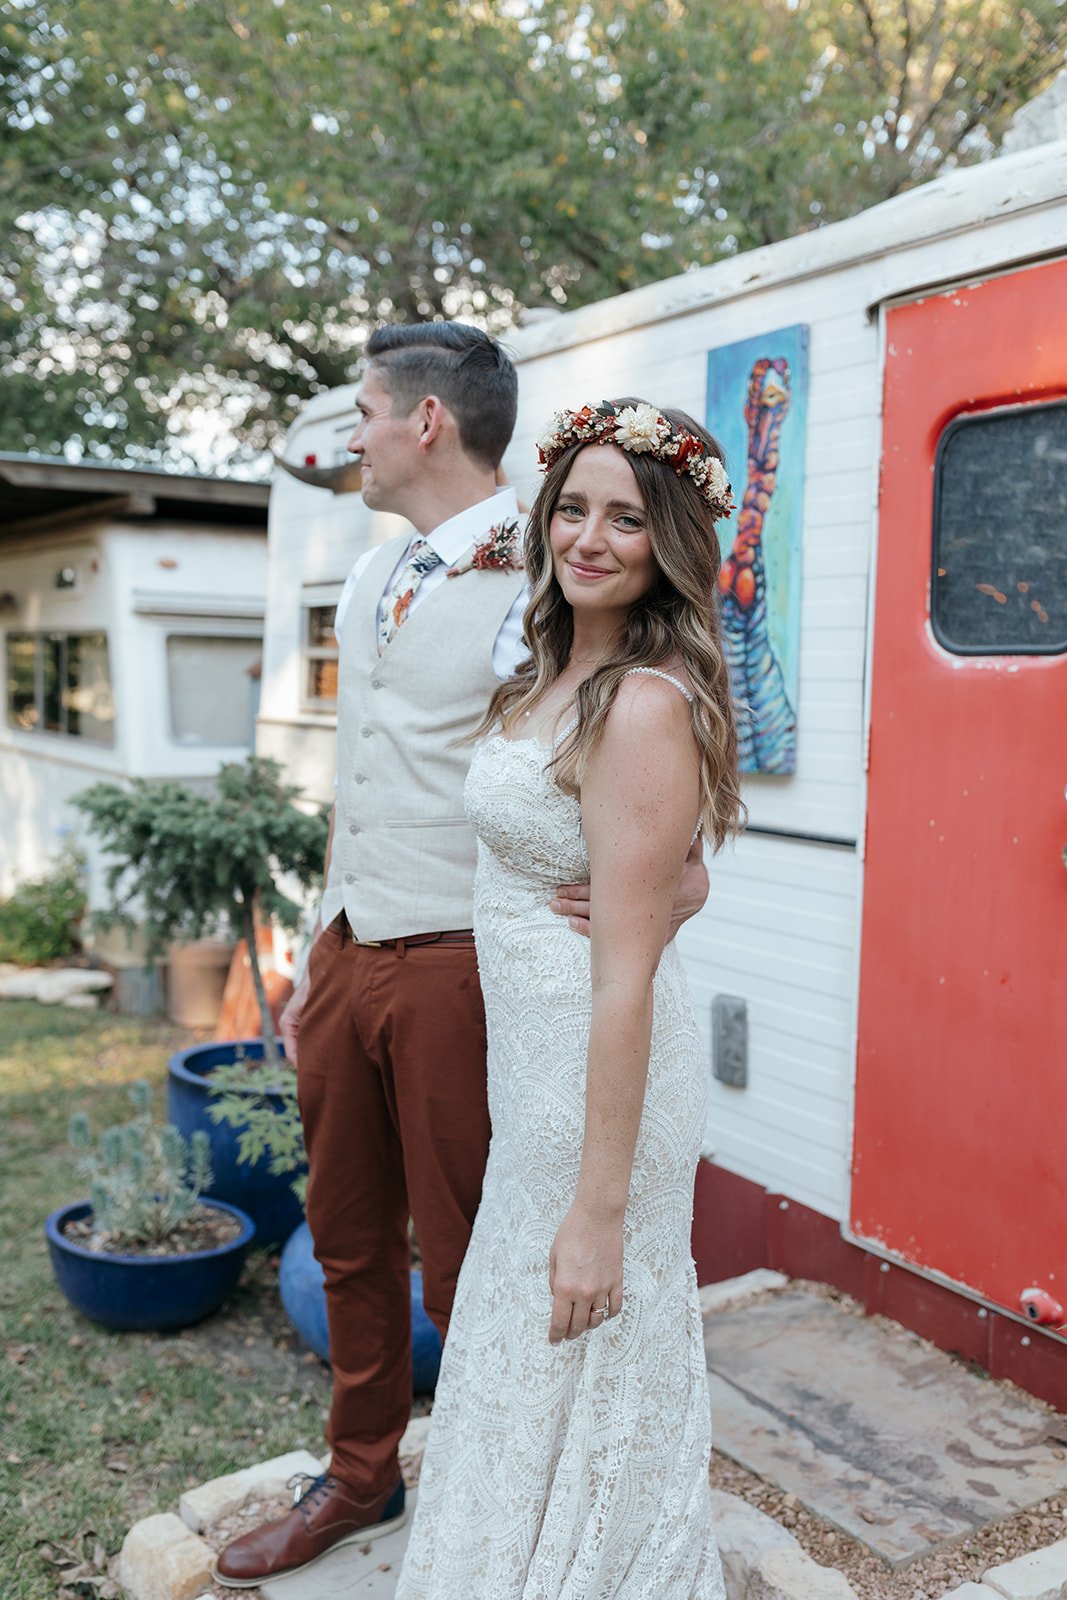 Wedding portraits in front of the retro campers